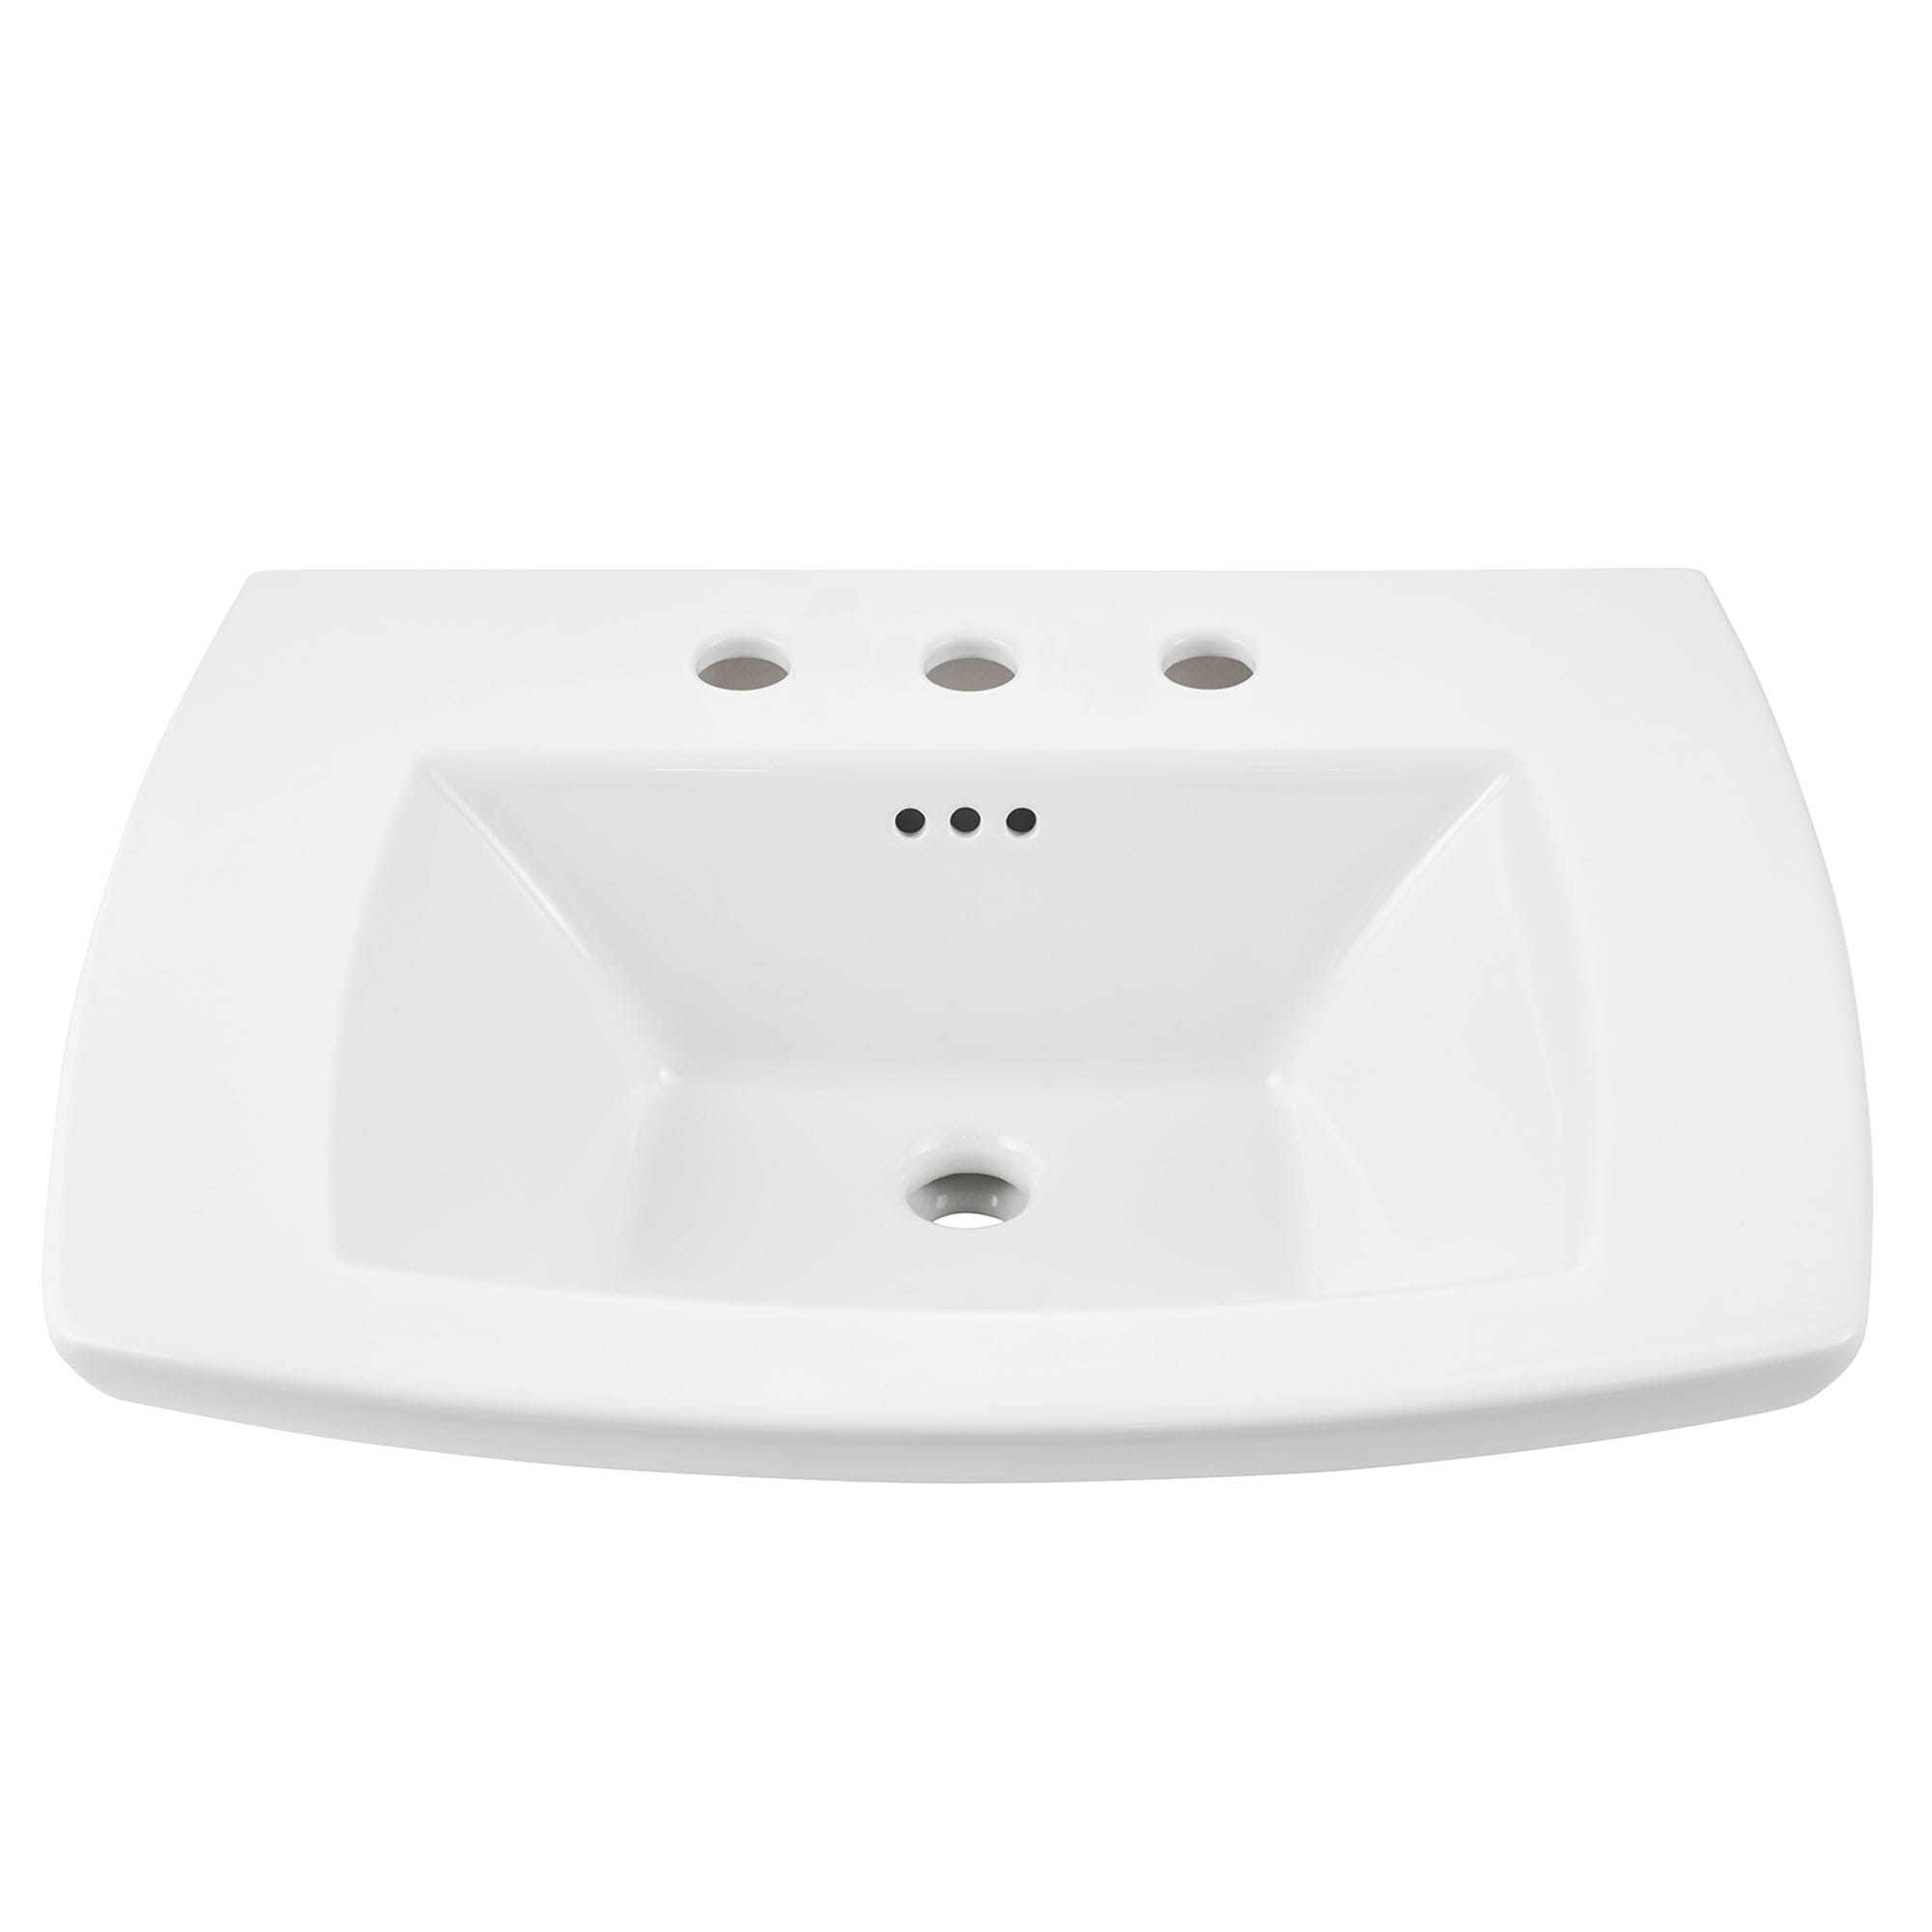 American Standard 0283.008.020 Standard Collection Pedestal Sink Top with 8-Inch Faucet Spacing White